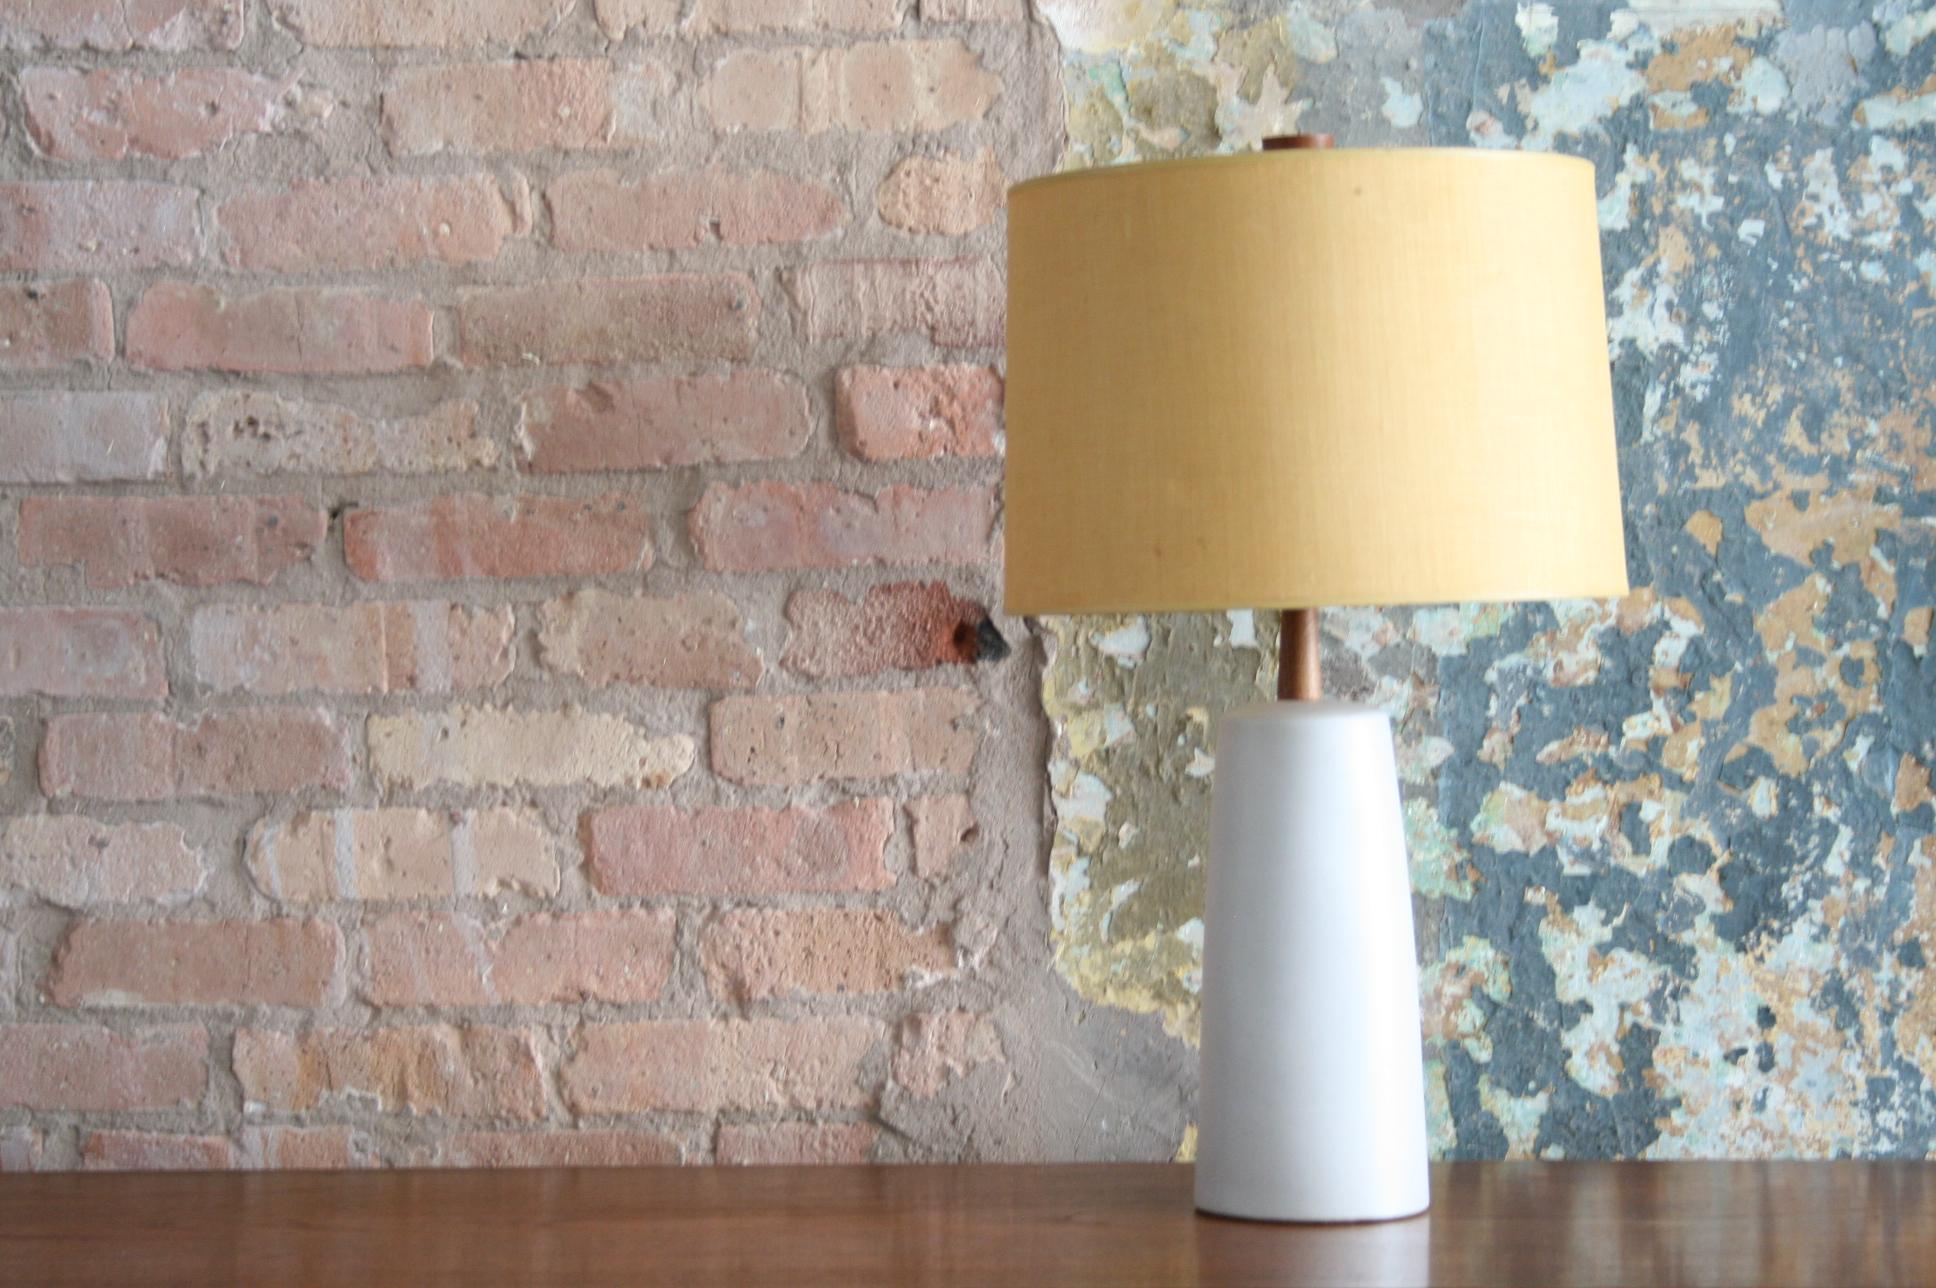 These rich and vivid glazed ceramic pottery table lamps were designed by Jane & Gordon Martz for Marshall Studios. Each is topped with original handmade Beige burlap shades and feature an original walnut finial with a base in a white beautiful matte